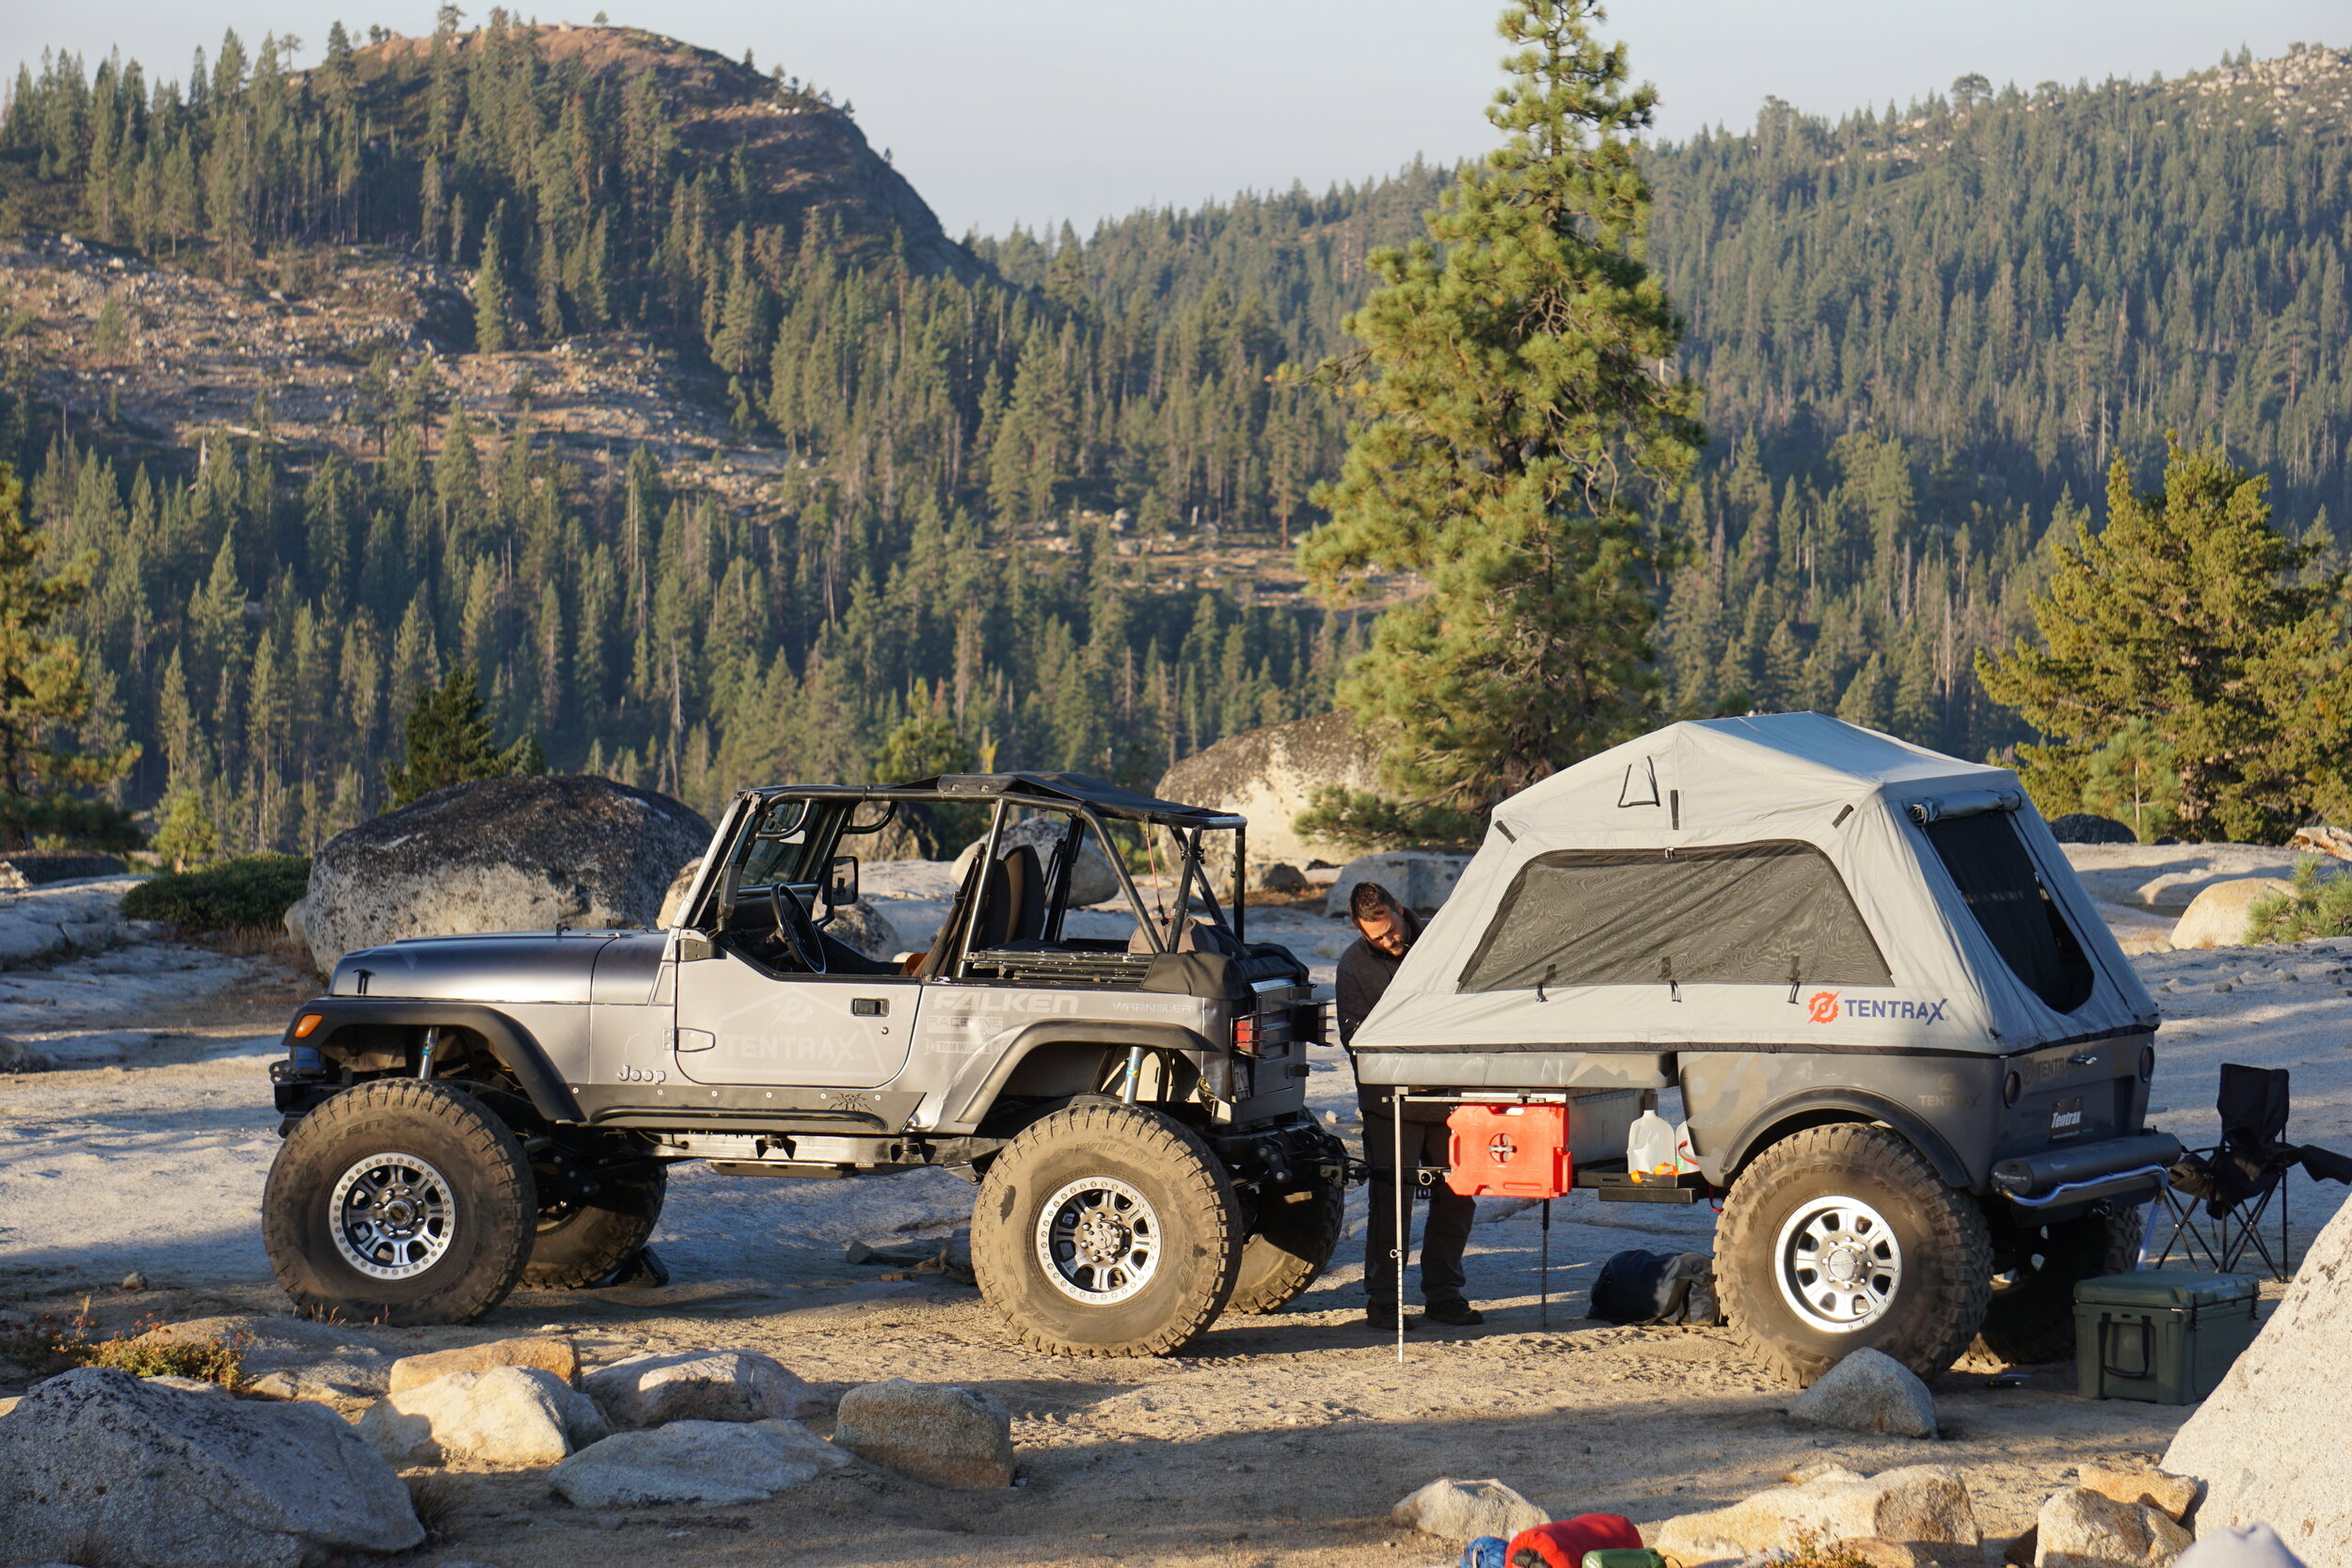 TENTRAX : Lightweight, compact, tough offroad tent trailers! Overland  trailers | Off-Road Camping Trailer | Off Road Camper | Jeep Trailer Camper  | Custom Camper Trailers | Contact us for a custom quote!